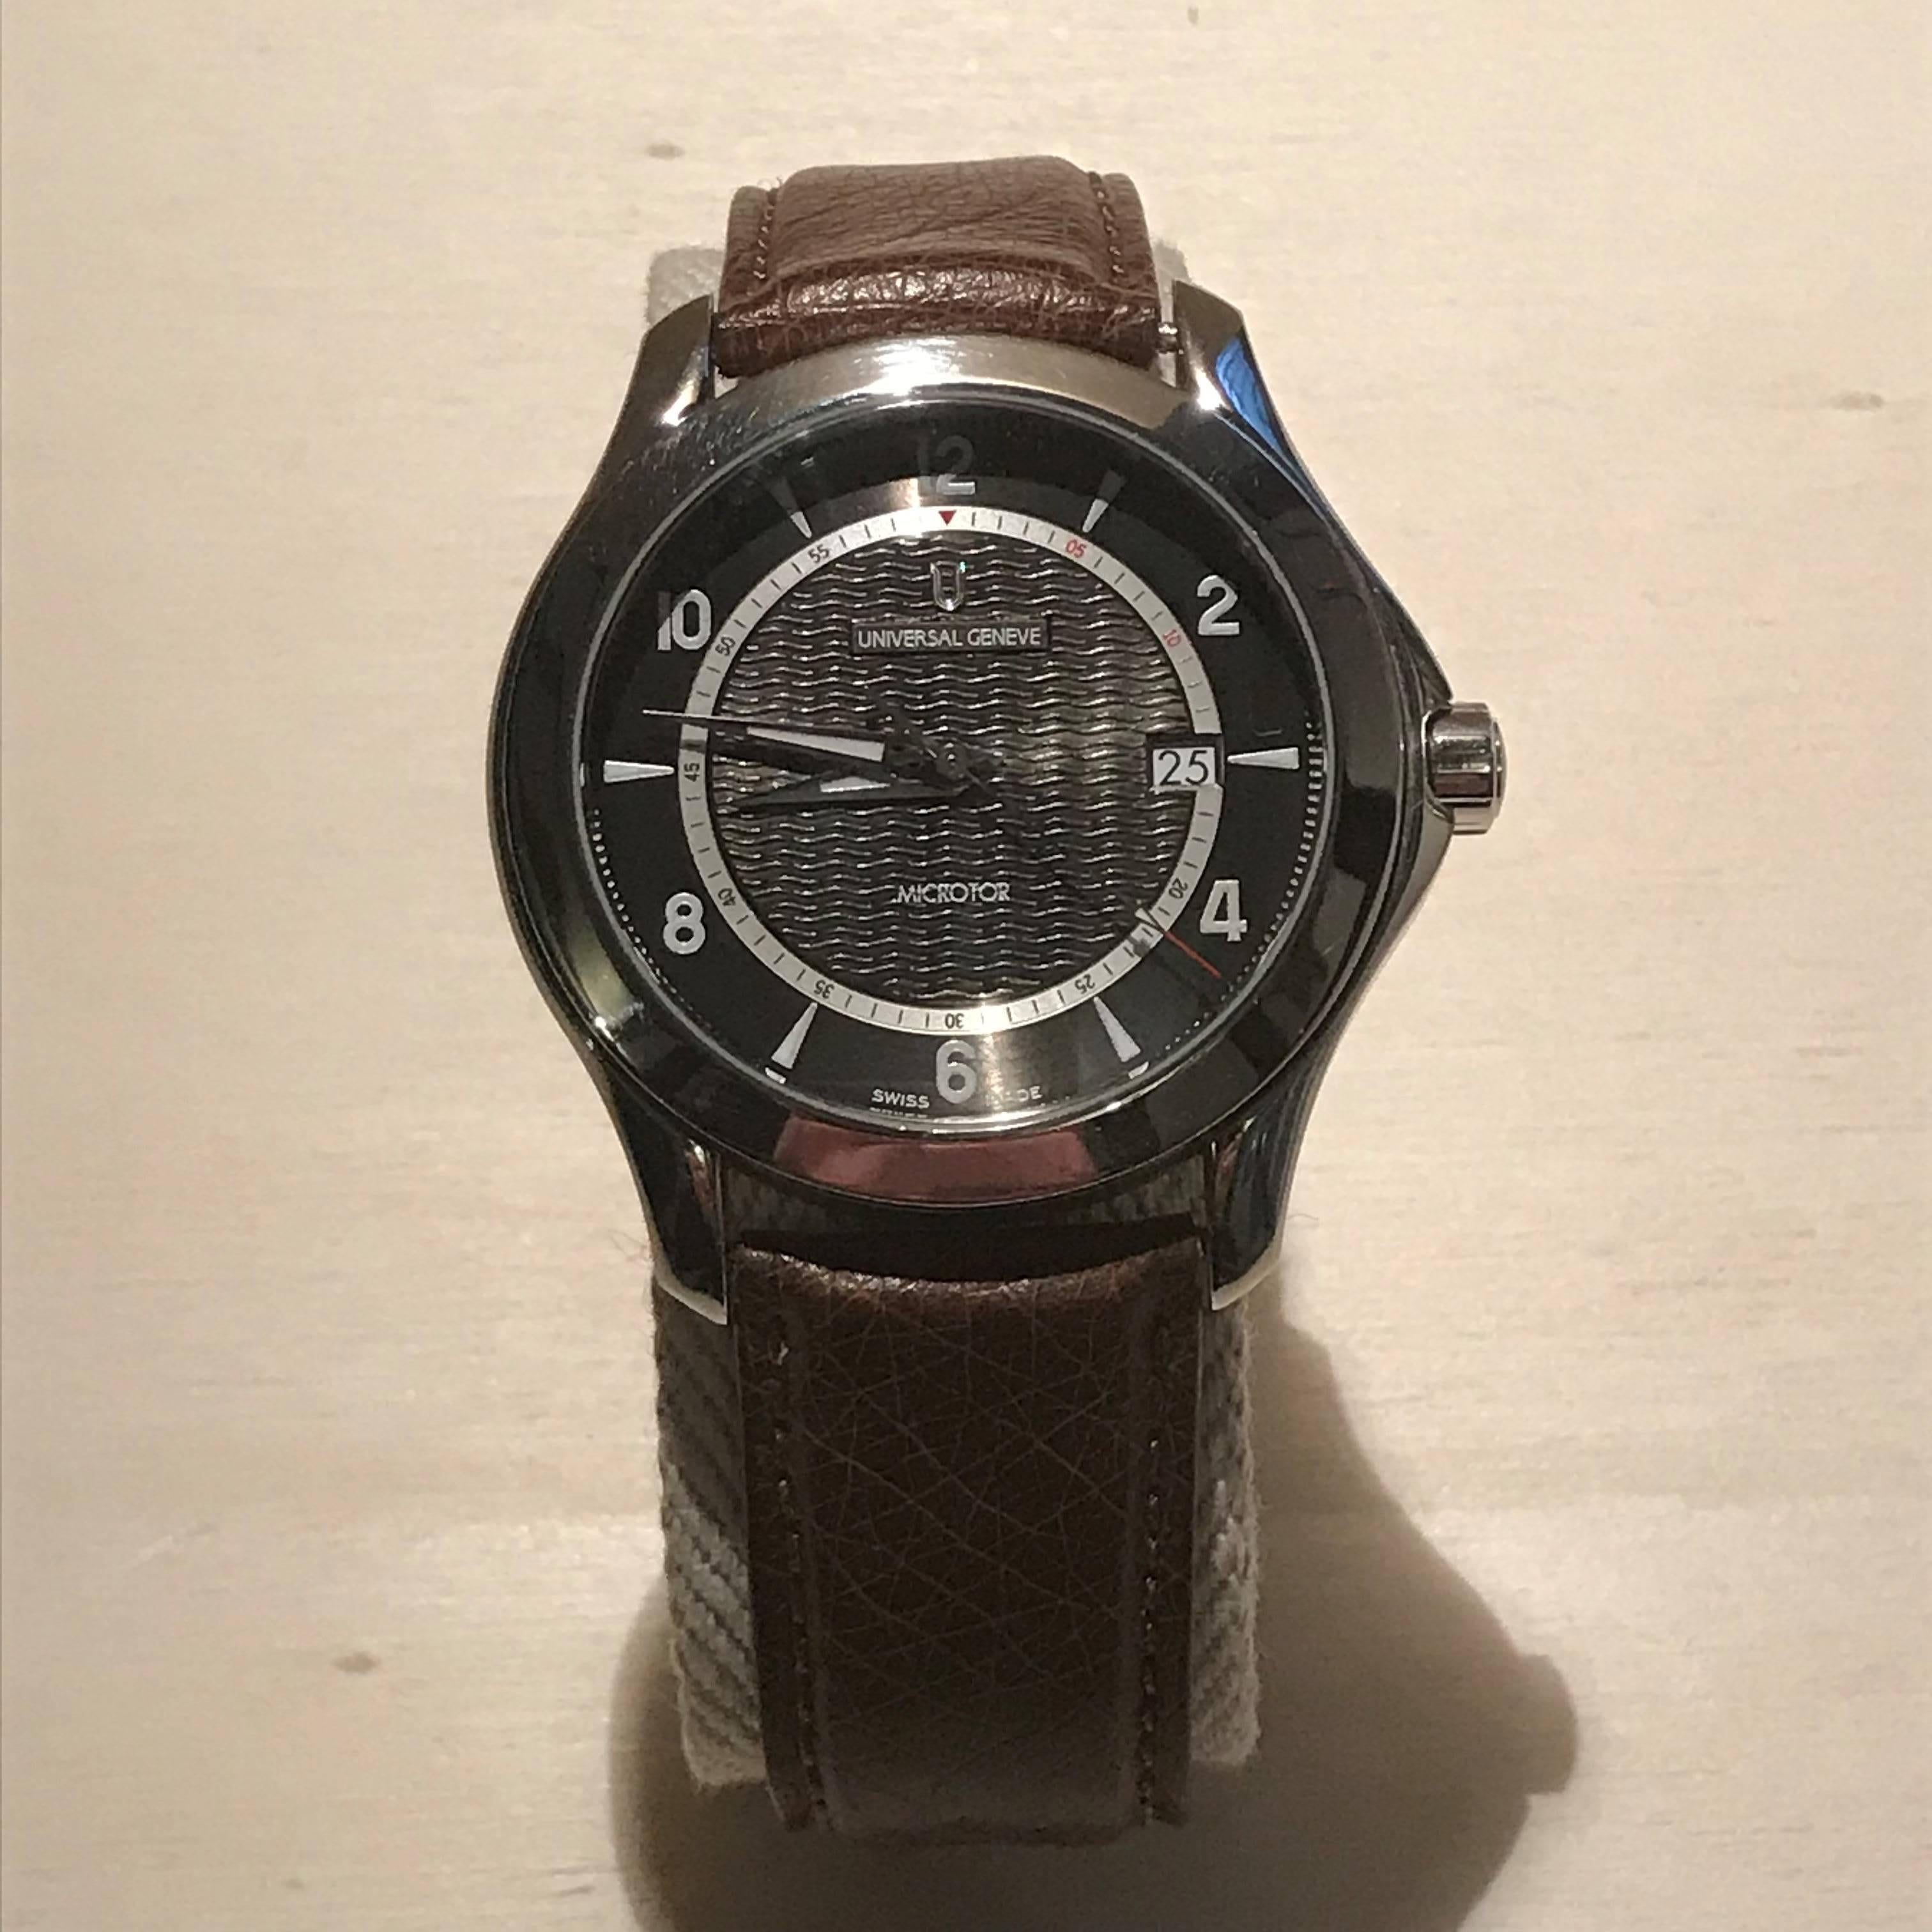 Rare and superb Universal Geneve microrotor.
Watch from the mythical family of the brand's Pole router.
The microrotor is a technology that made the myth Patek Philippe.
steel/leather strap. Deploying buckle.
guilloché black dial.
date at 3 o'